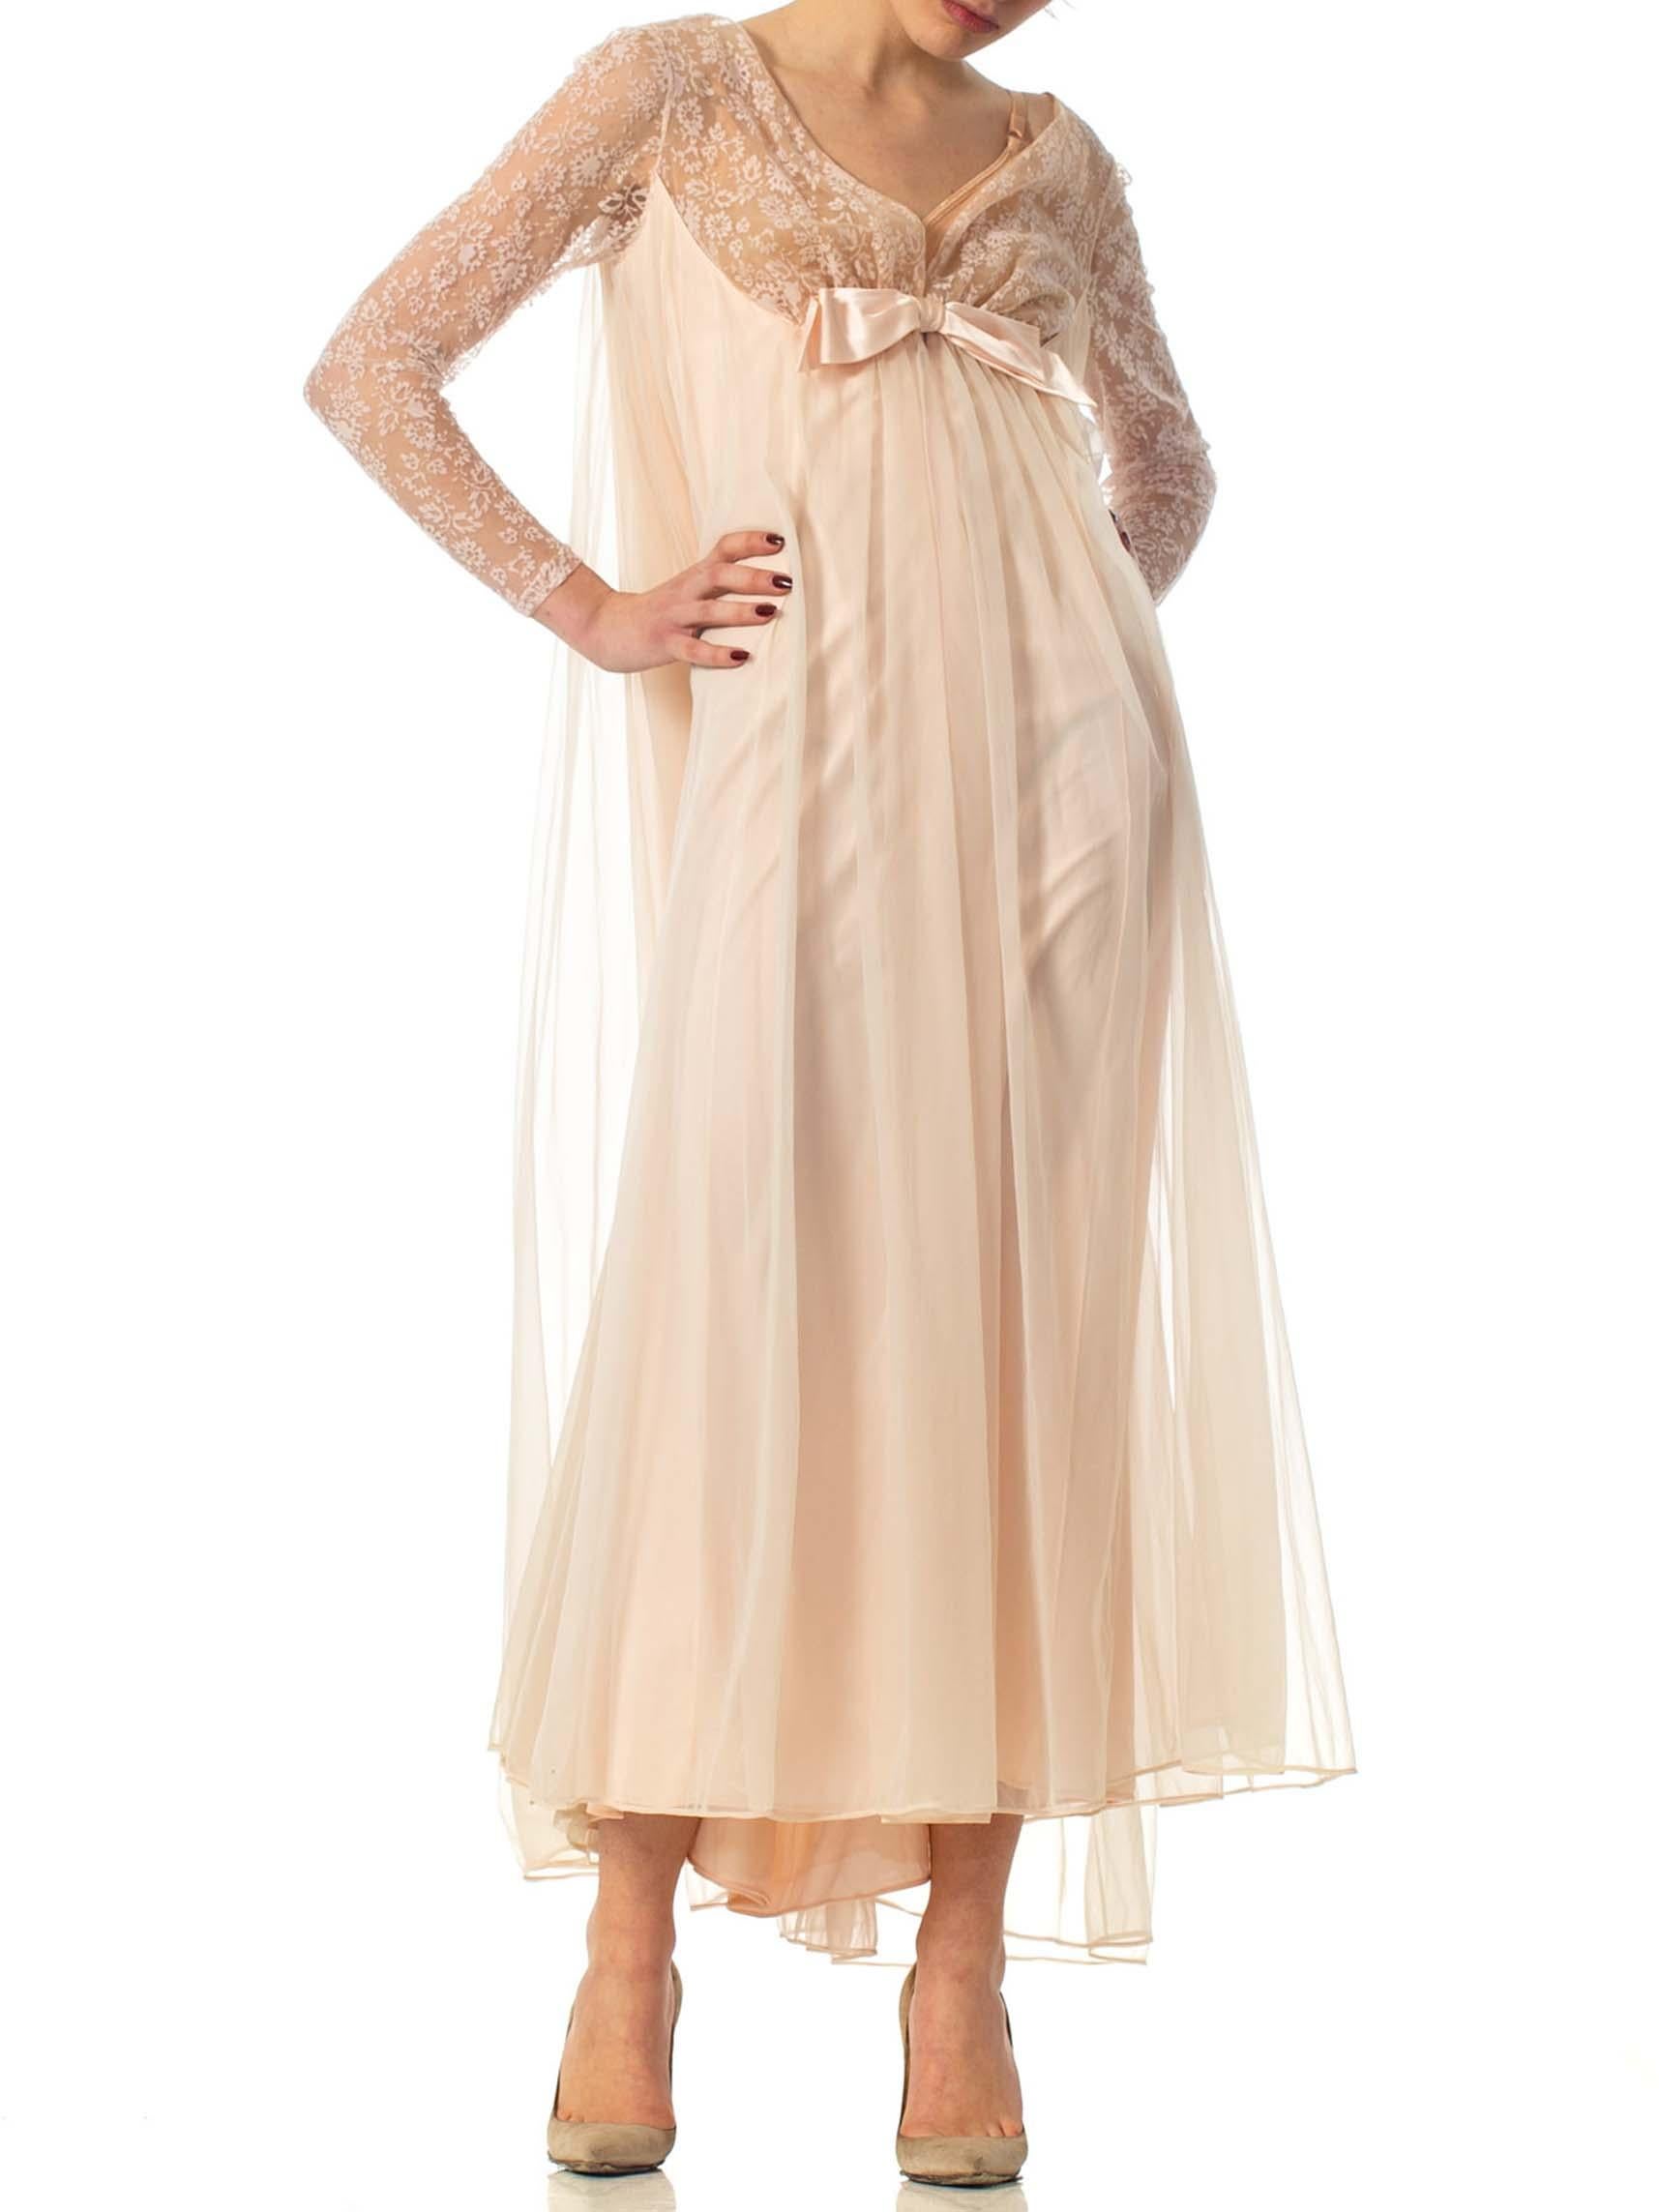 Beige 1960S Nude Nylon Chiffon Jersey Romantic Negligee House Dress With Sleeves For Sale